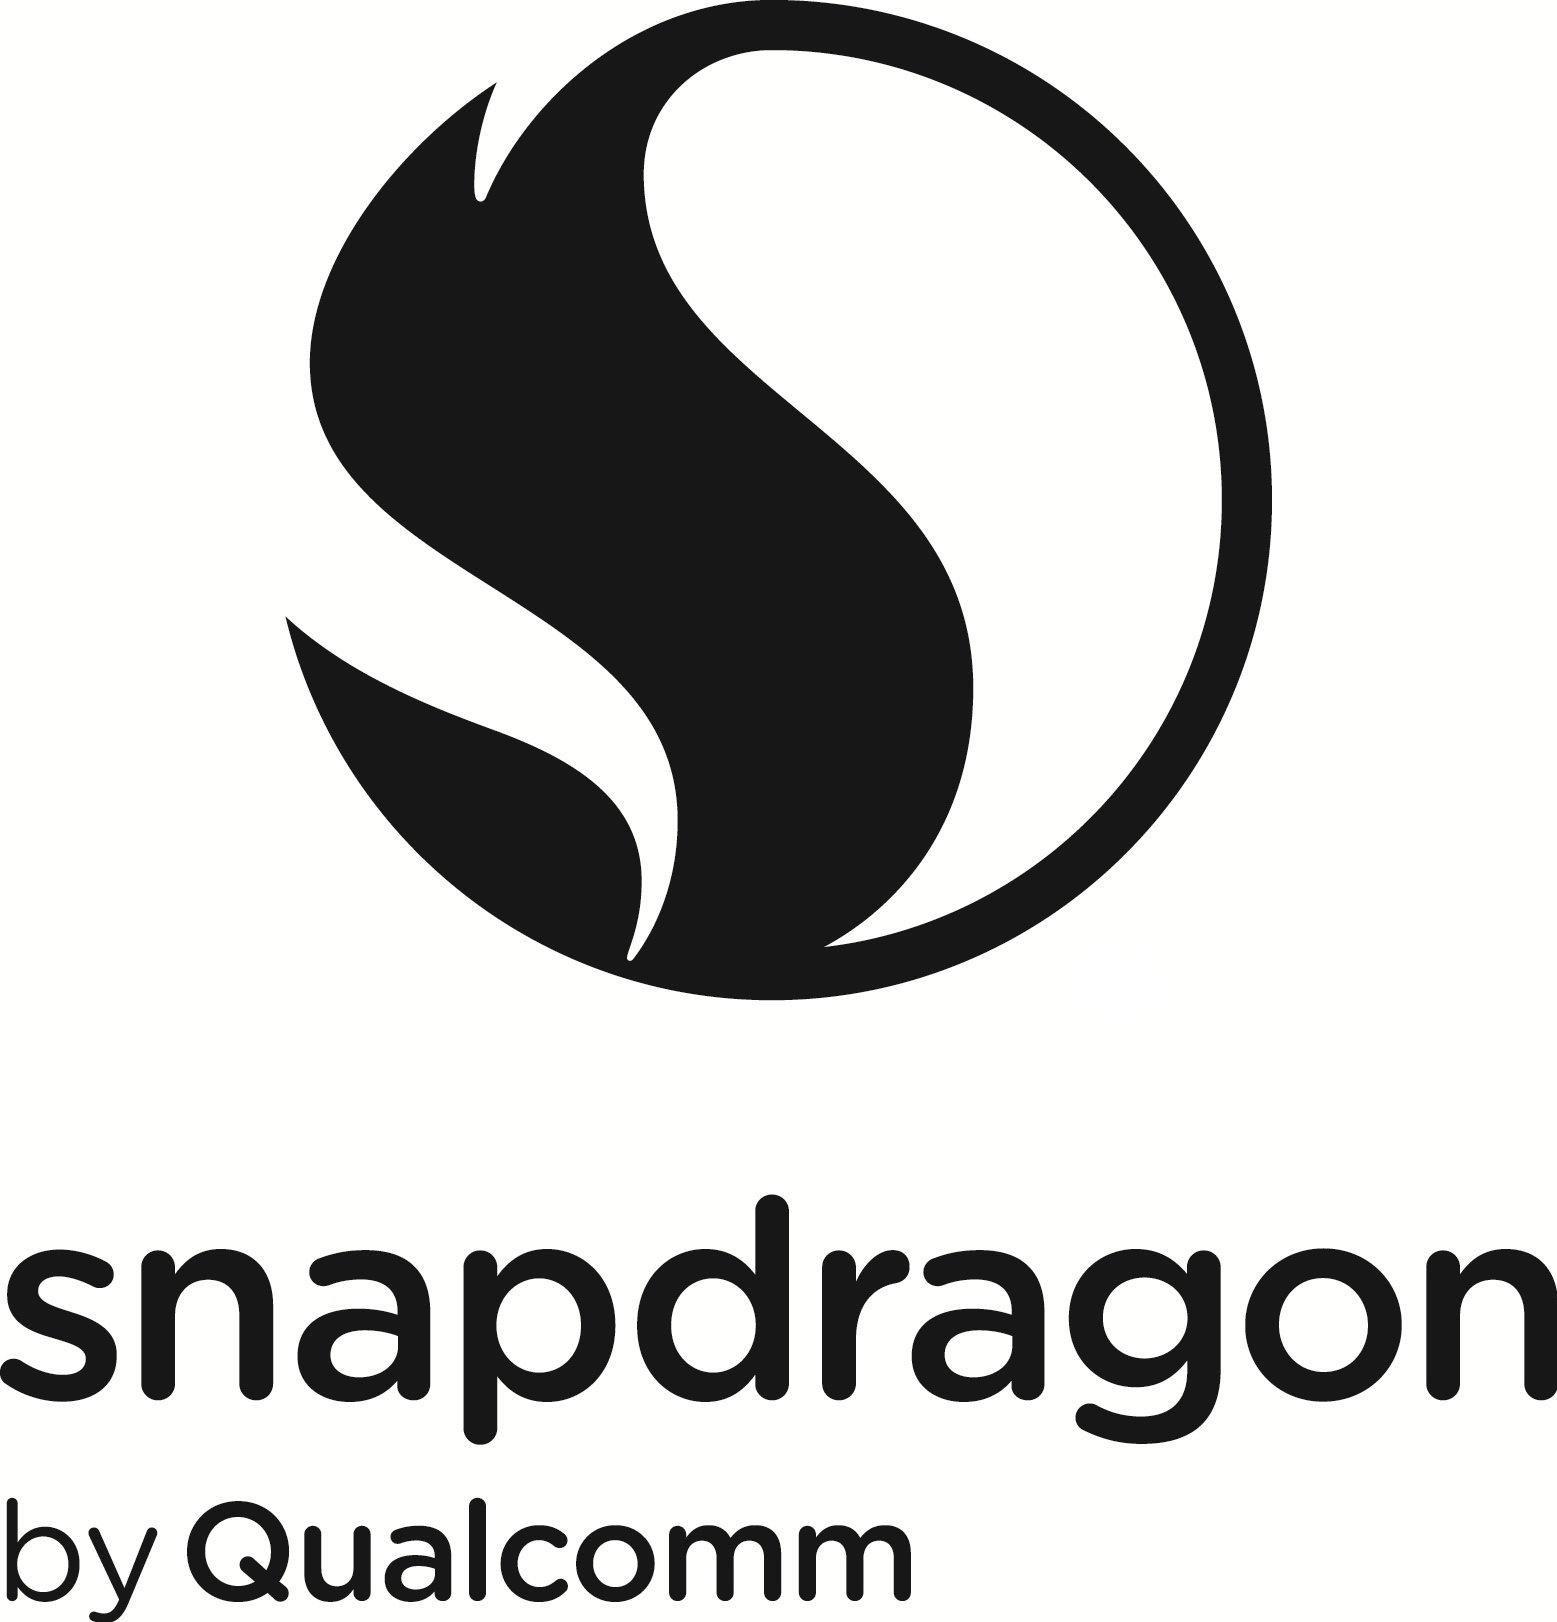 Snapdragon Logo - Qualcomm's All In One Snapdragon VR820 Headset Could Reduce Cost